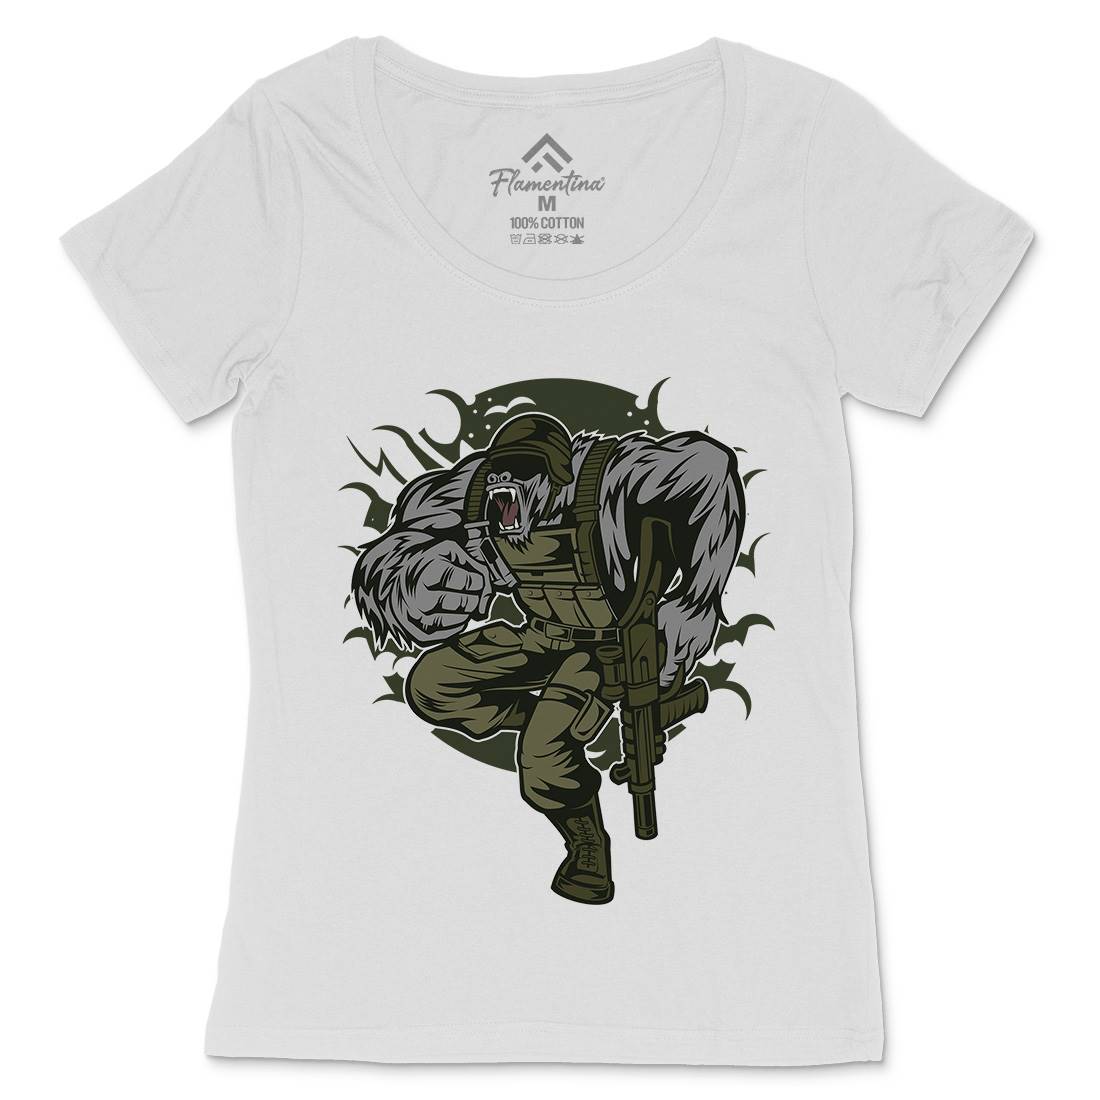 Soldier Ape Womens Scoop Neck T-Shirt Army C448